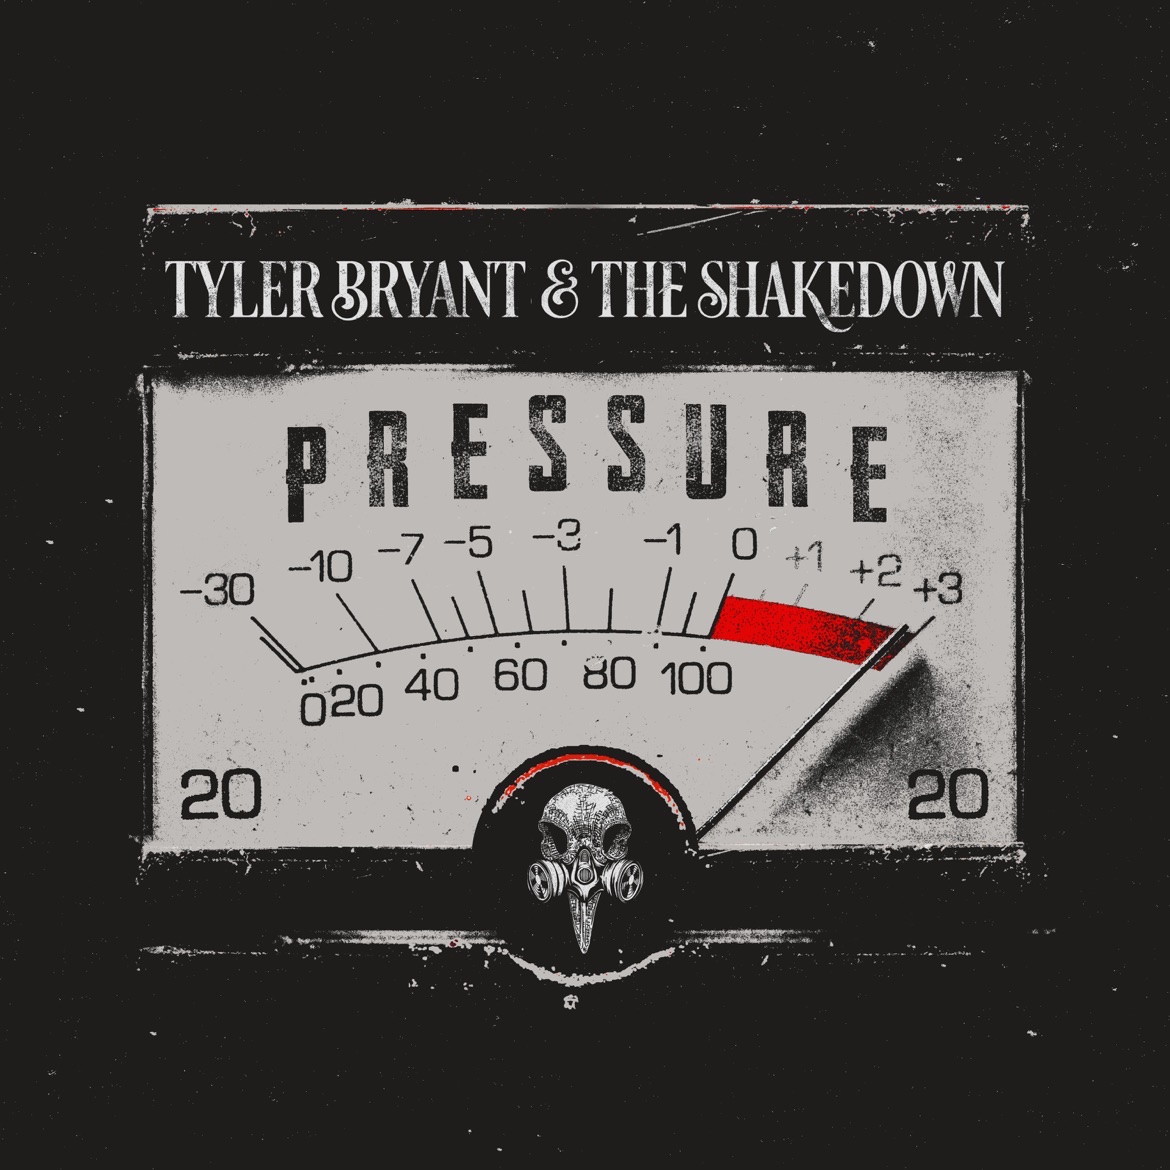 #nowplaying: 'Misery' from 'Pressure' by #TylerBryant & The Shakedown